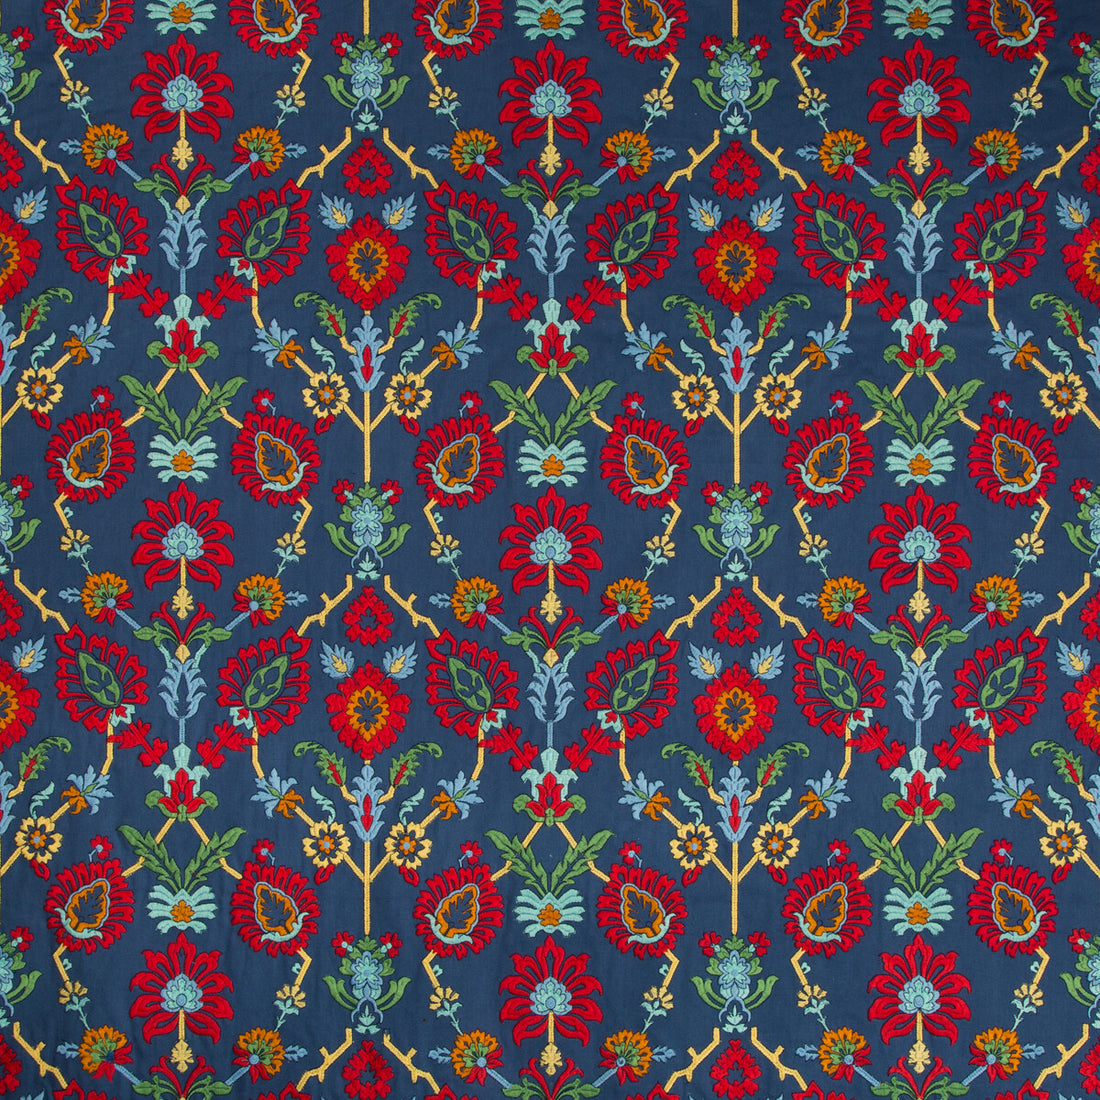 Solanum Emb fabric in indigo/red color - pattern 8018116.519.0 - by Brunschwig &amp; Fils in the Baret collection